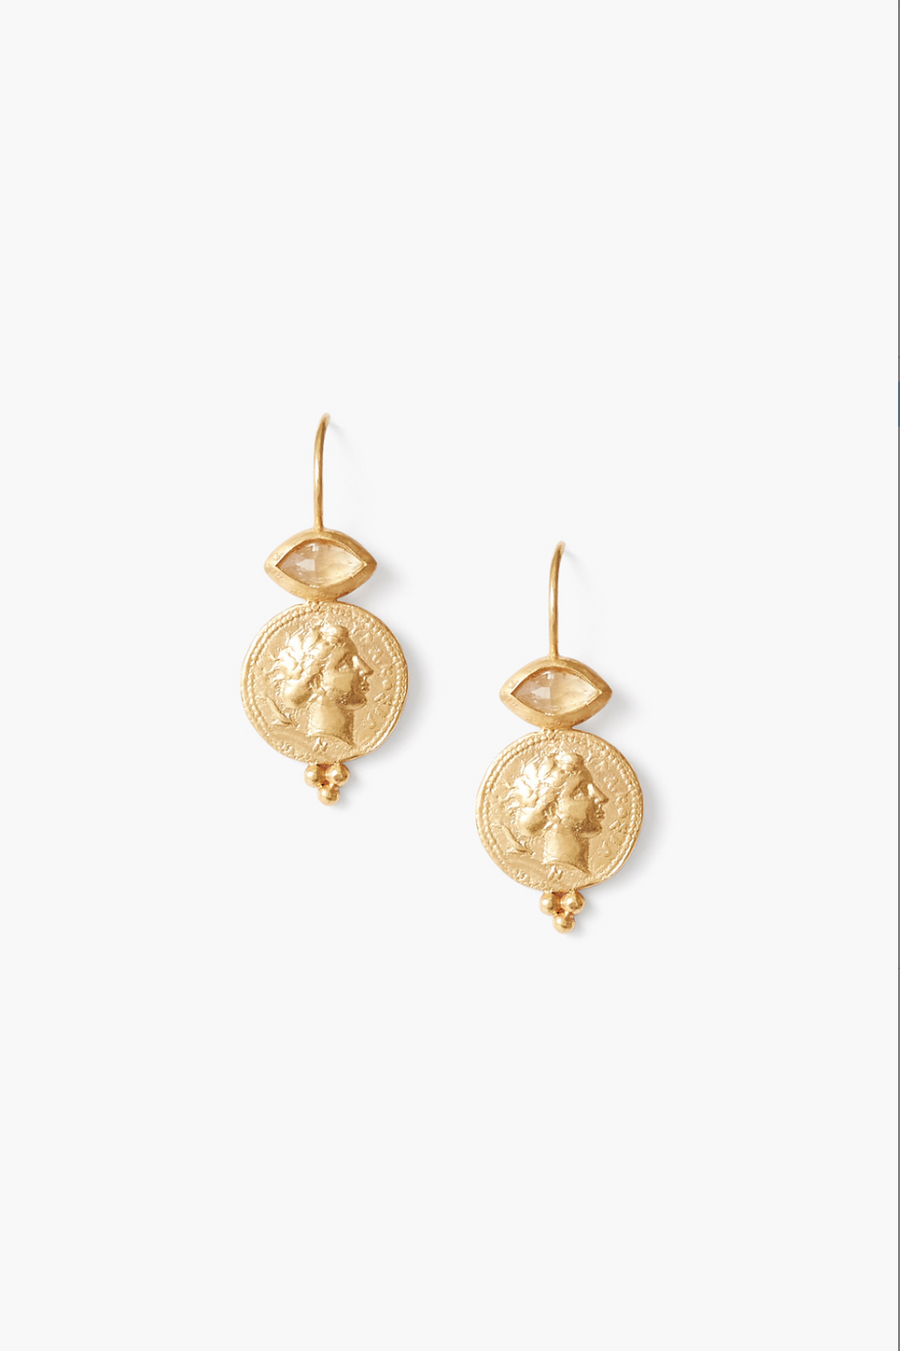 Citrine Coin Earrings on French Wire - Gold